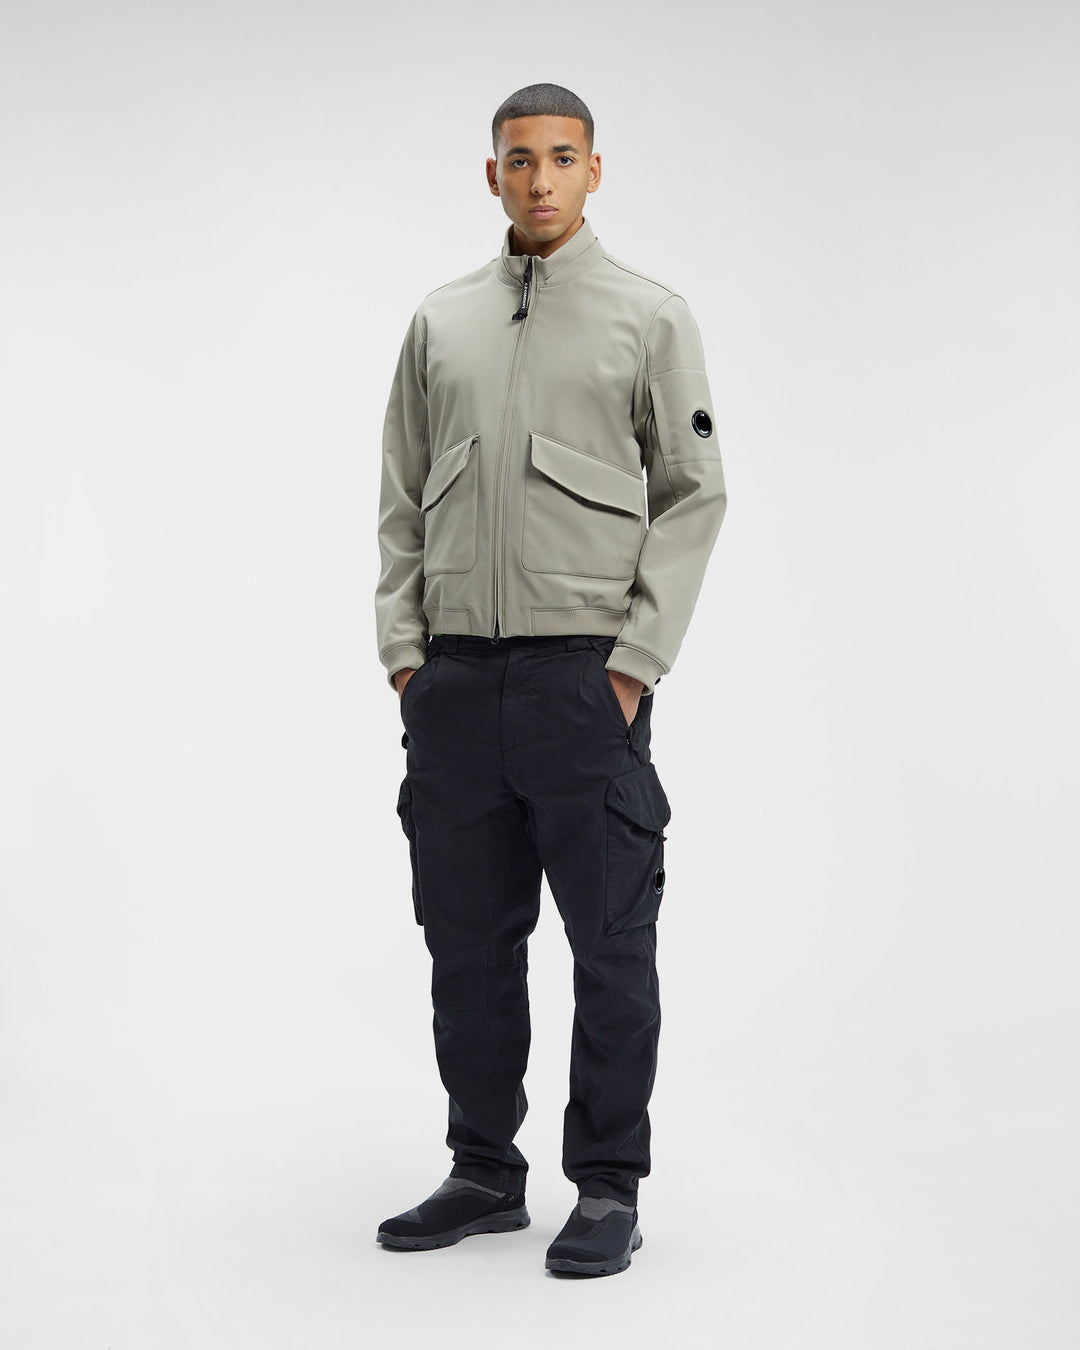 C.P. Shell-R Bomber Jacket - SILVER SAGE